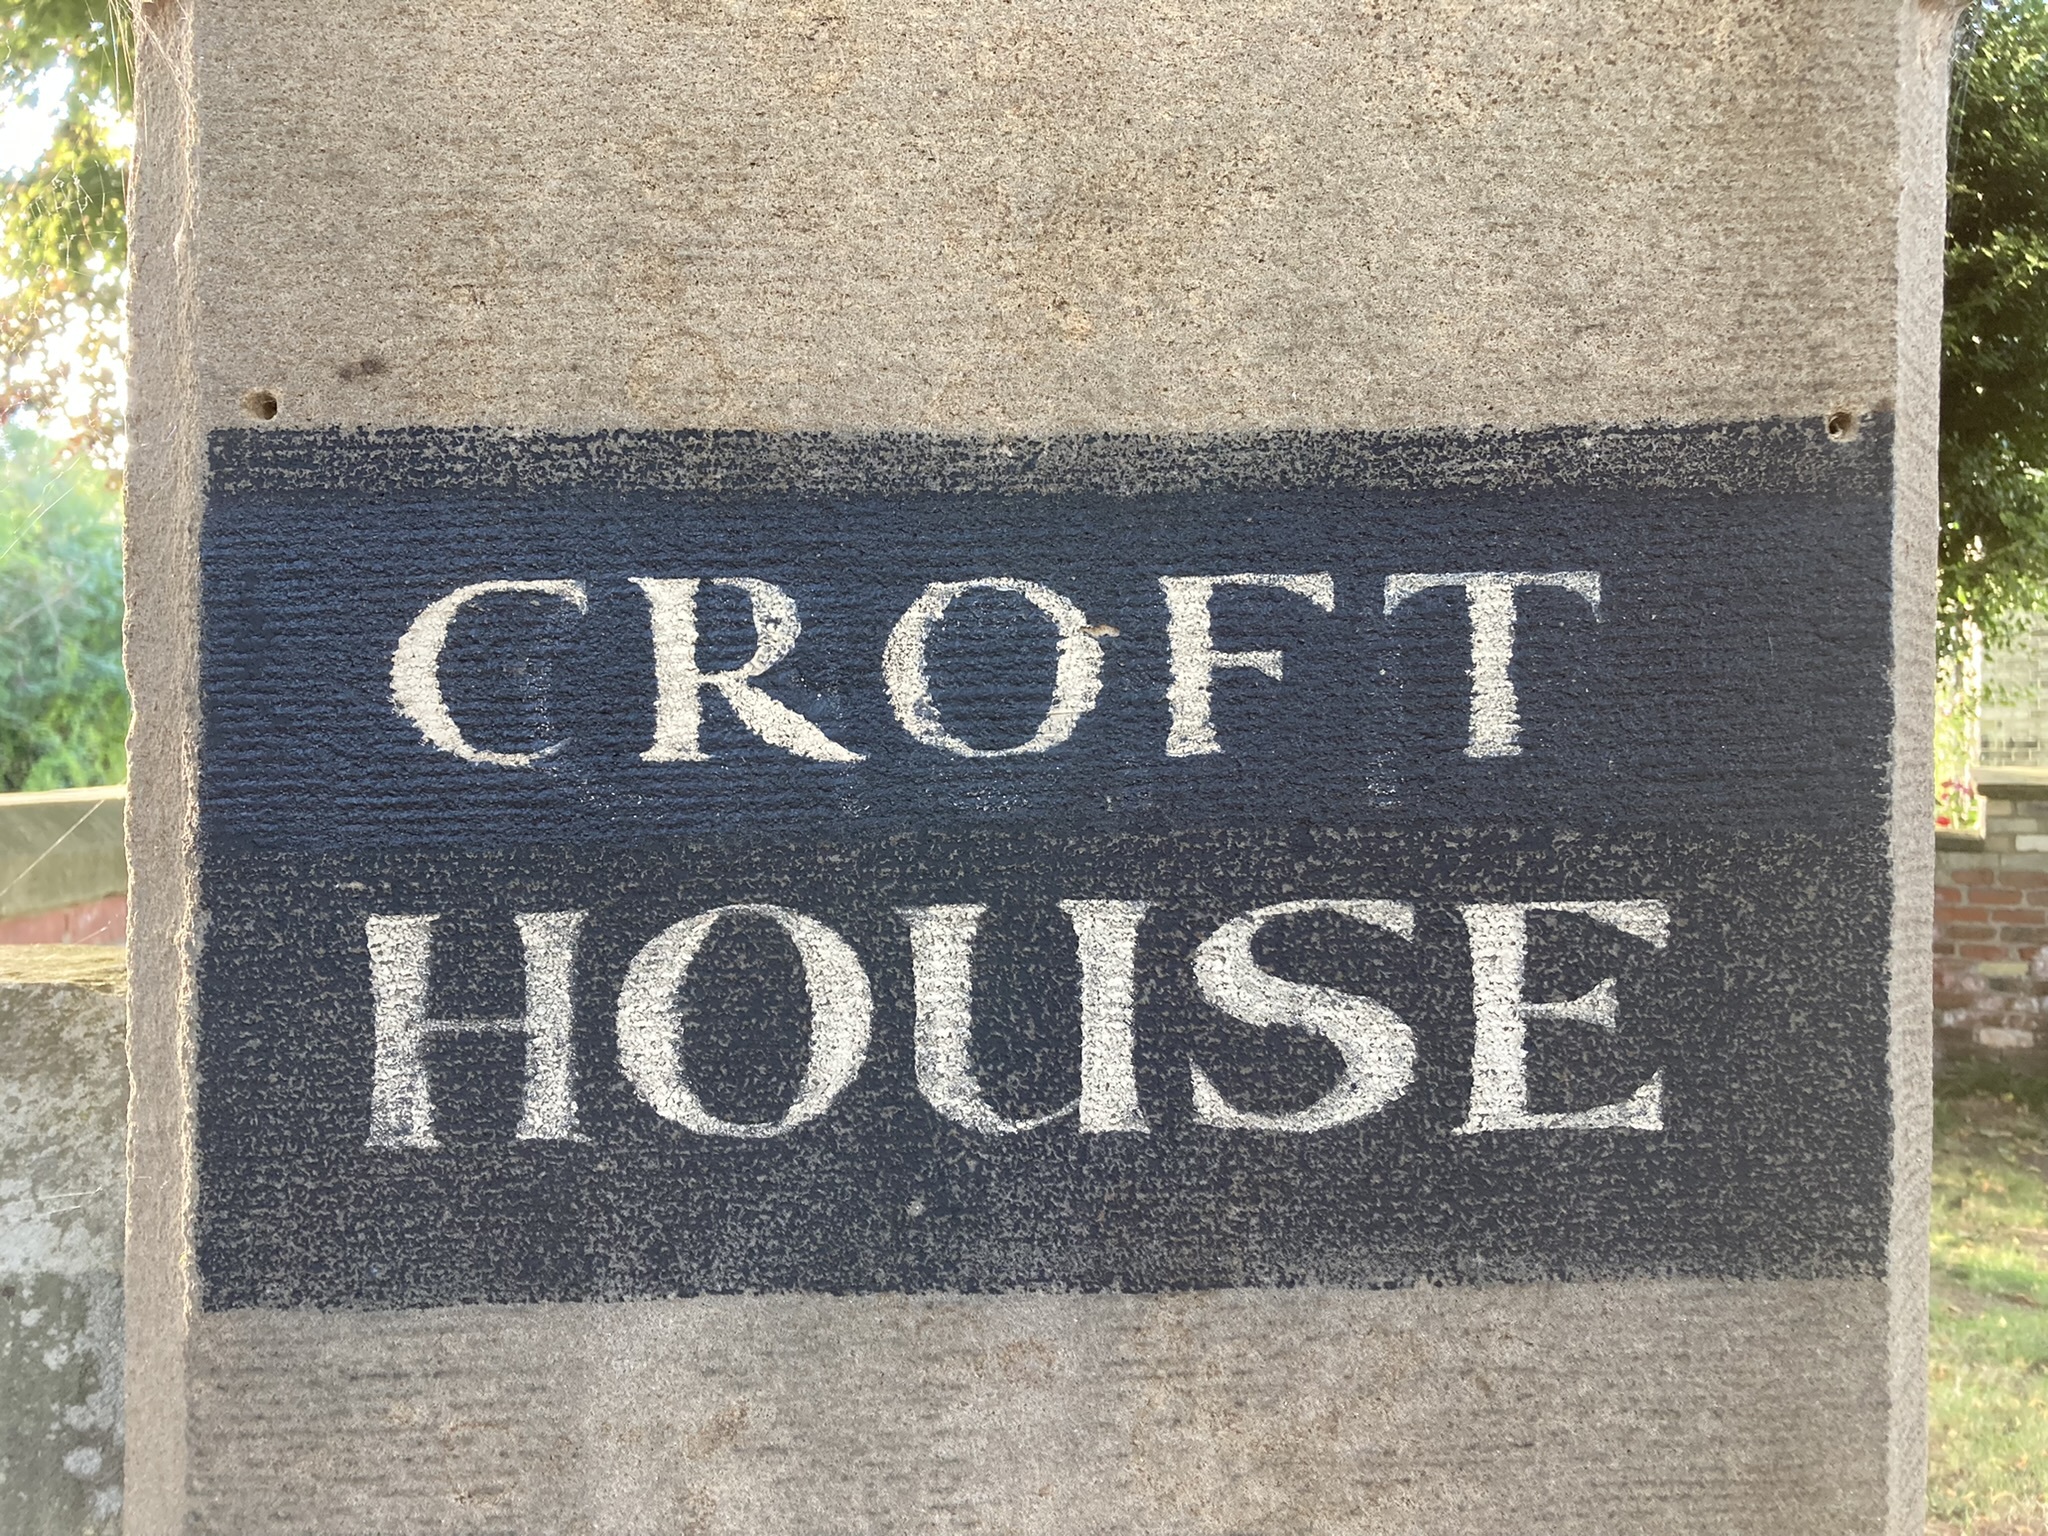 Croft House was demolished in 2017 and replaced by five executive houses, but its name remains on its old post